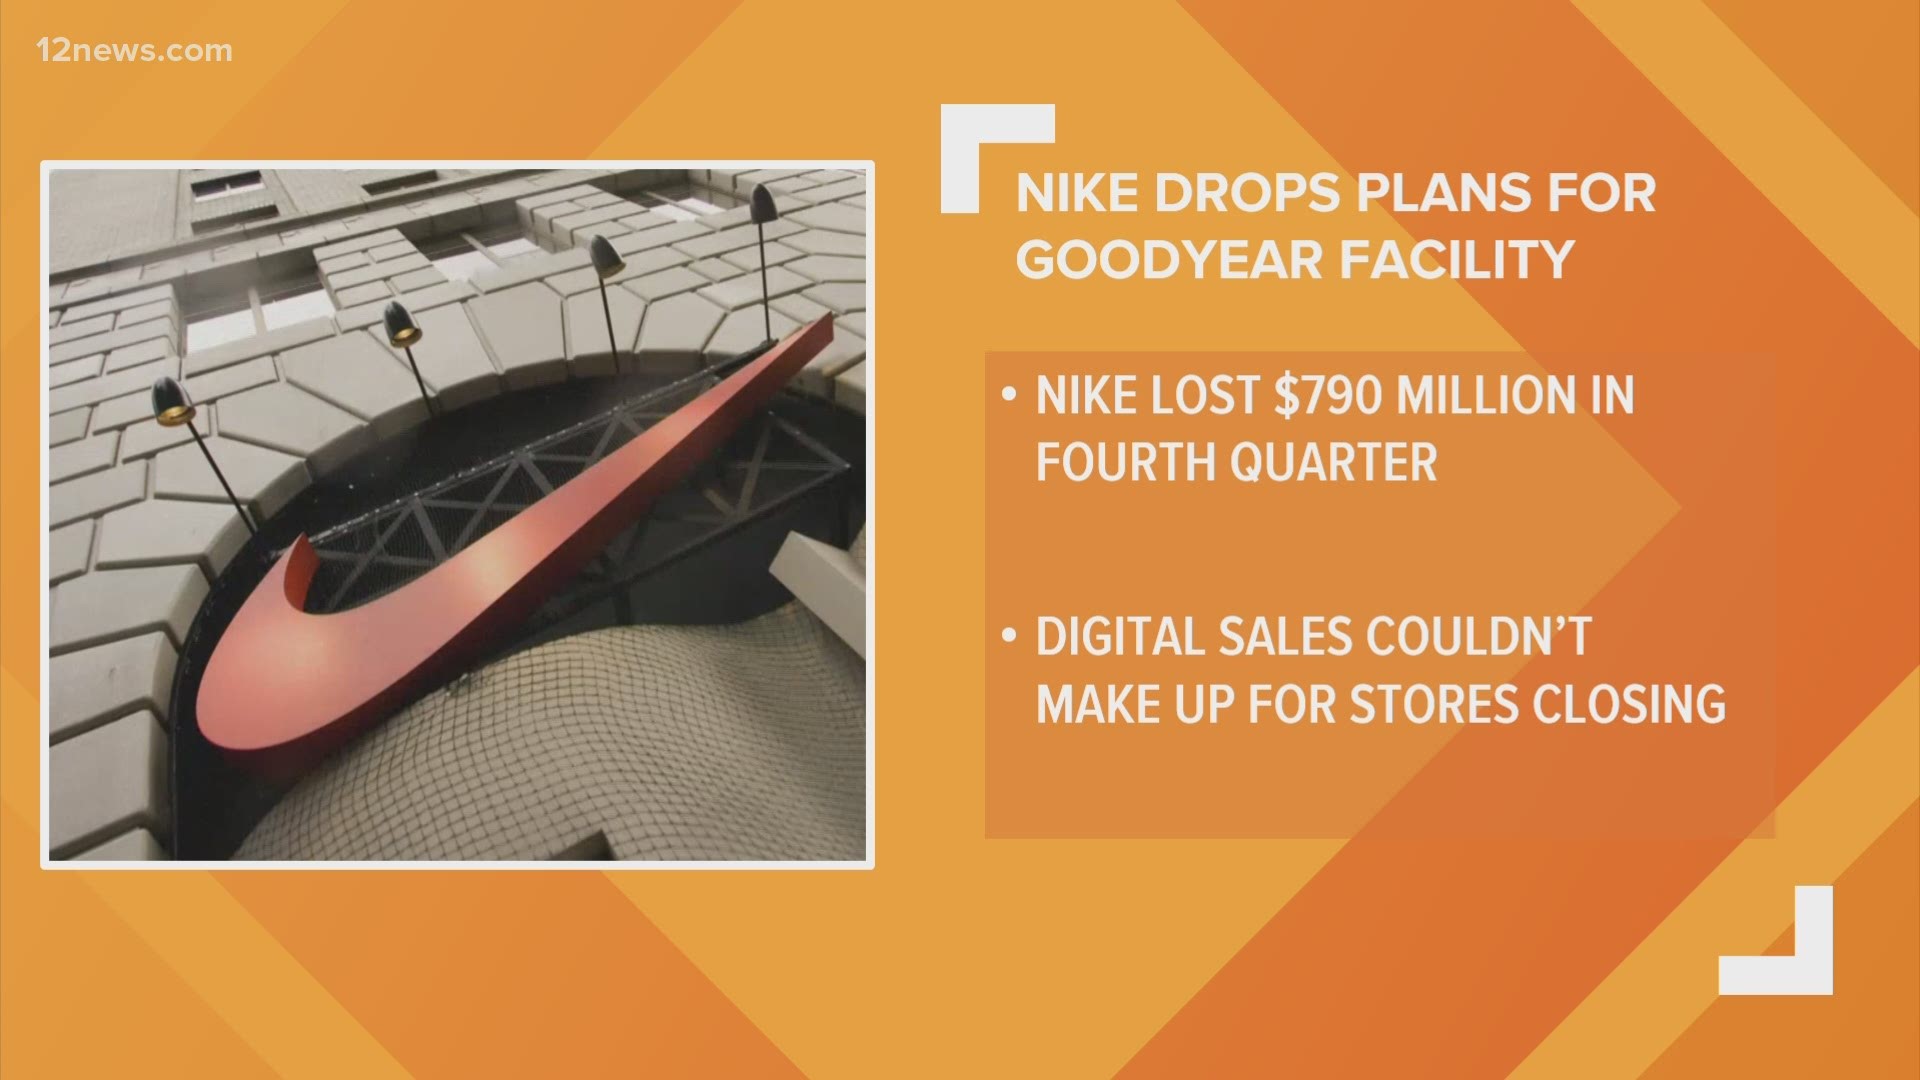 Nike is canceling its plans for a new manufacturing facility in Goodyear. Team 12's Marc Liverman has the latest.